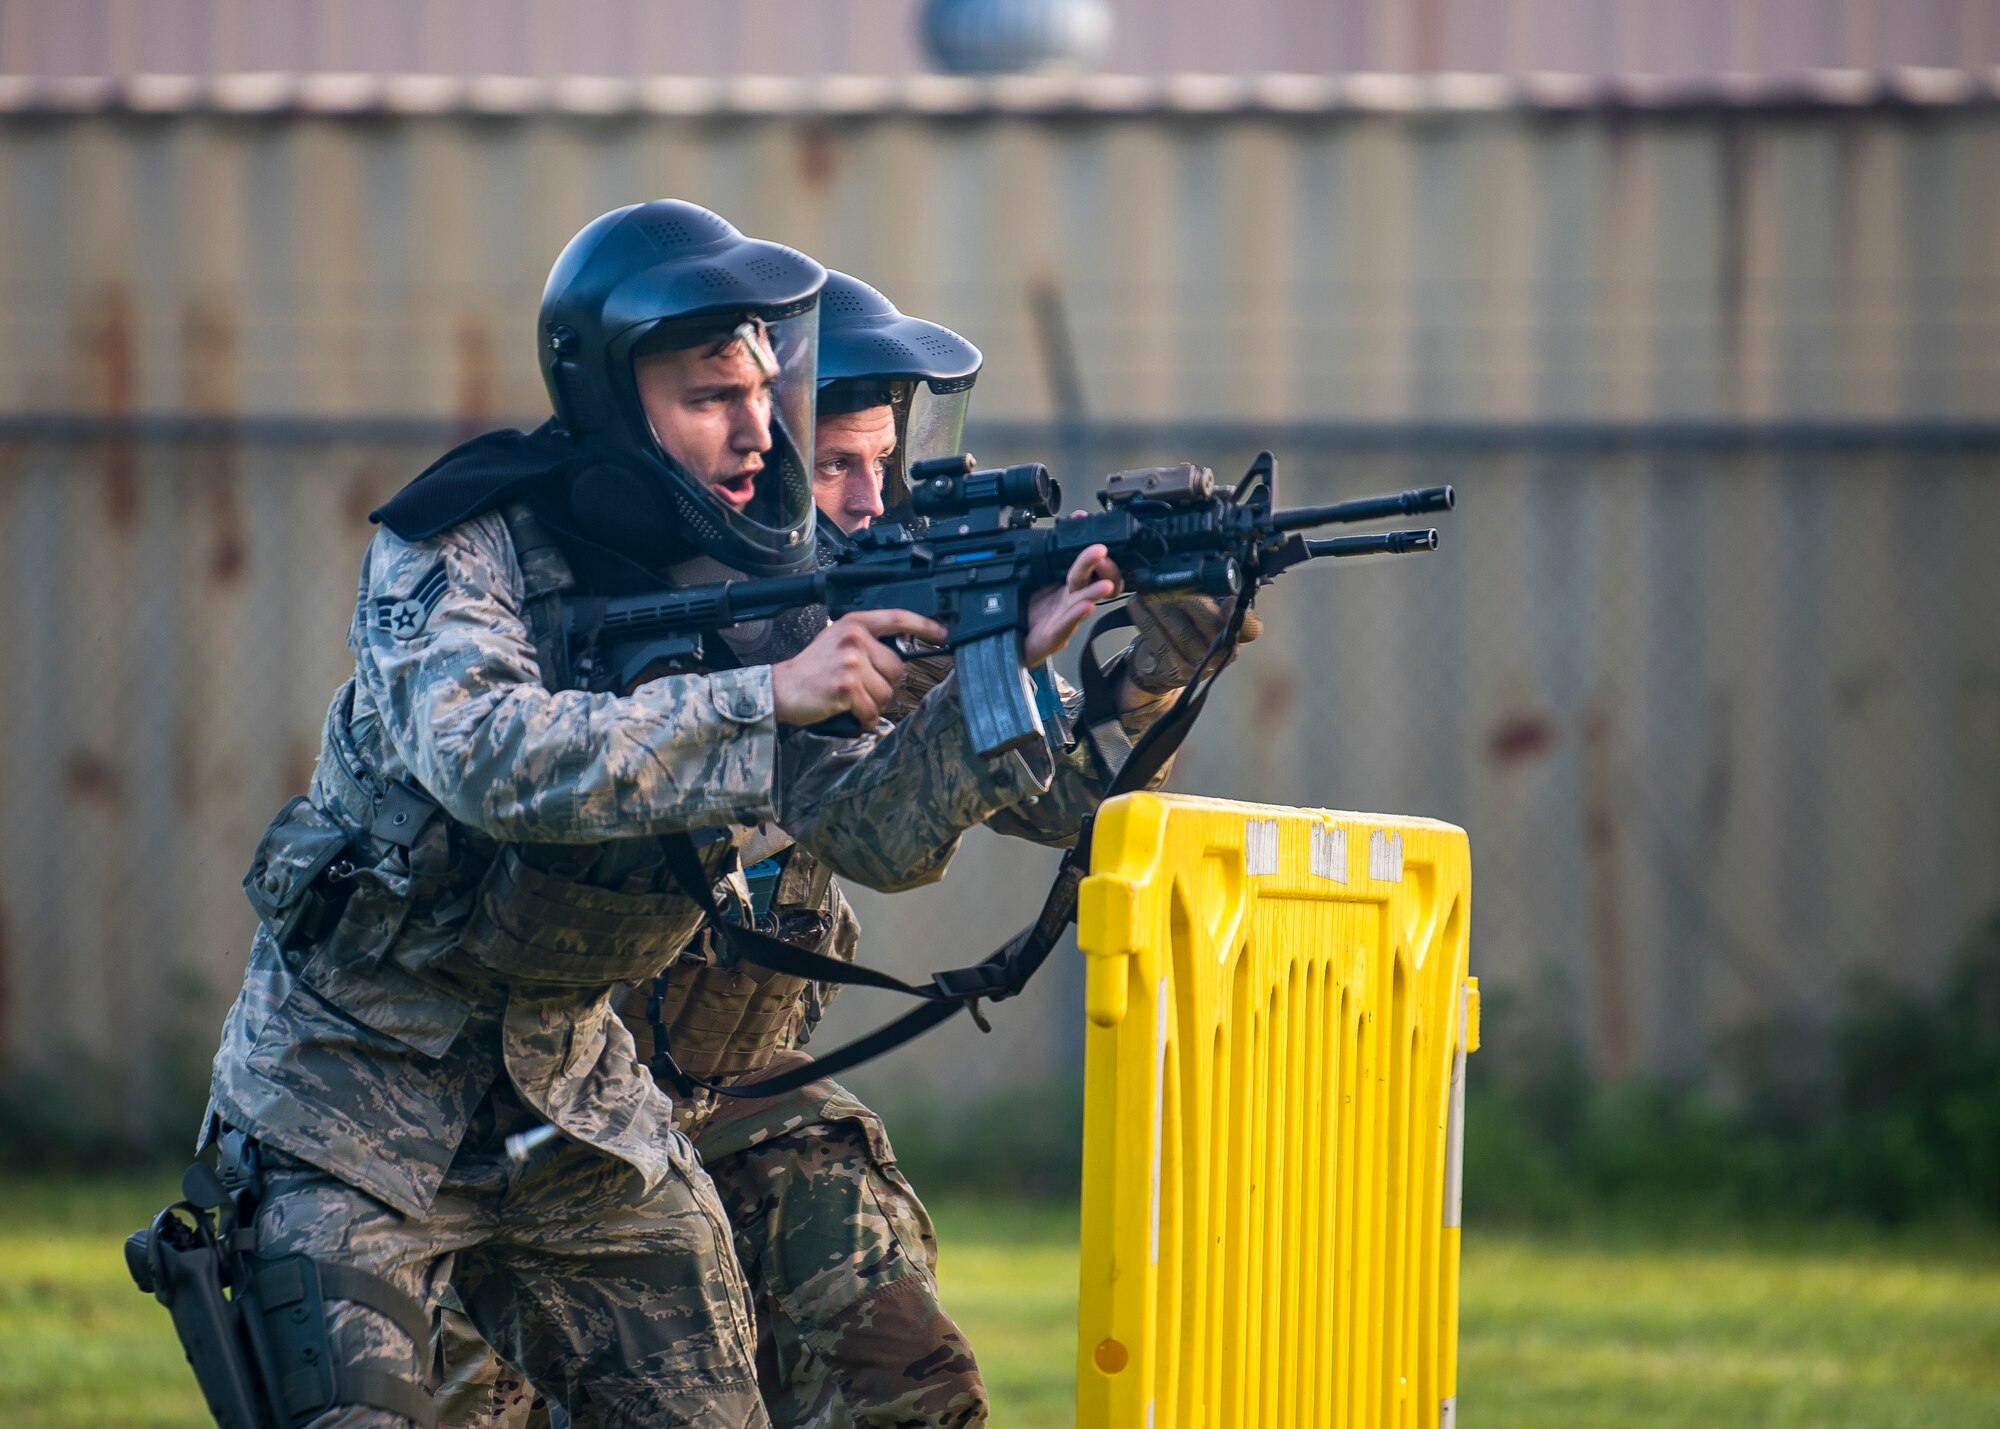 Senior Airman Kyle Macintyre and Staff Sgt. Christian Bertram, both 23d Security Forces Squadron patrolmen, advance their position during a training exercise, July 15, 2019, at Moody Air Force Base, Ga. The “Shoot, move, communicate” training exercise put participants through practice maneuvers taking turns providing cover fire while others advanced on the enemy. Airmen learned how to shoot, move and communicate to build confidence in themselves, their wingmen and with their weapons. (U.S. Air Force photo by Airman 1st Class Eugene Oliver)